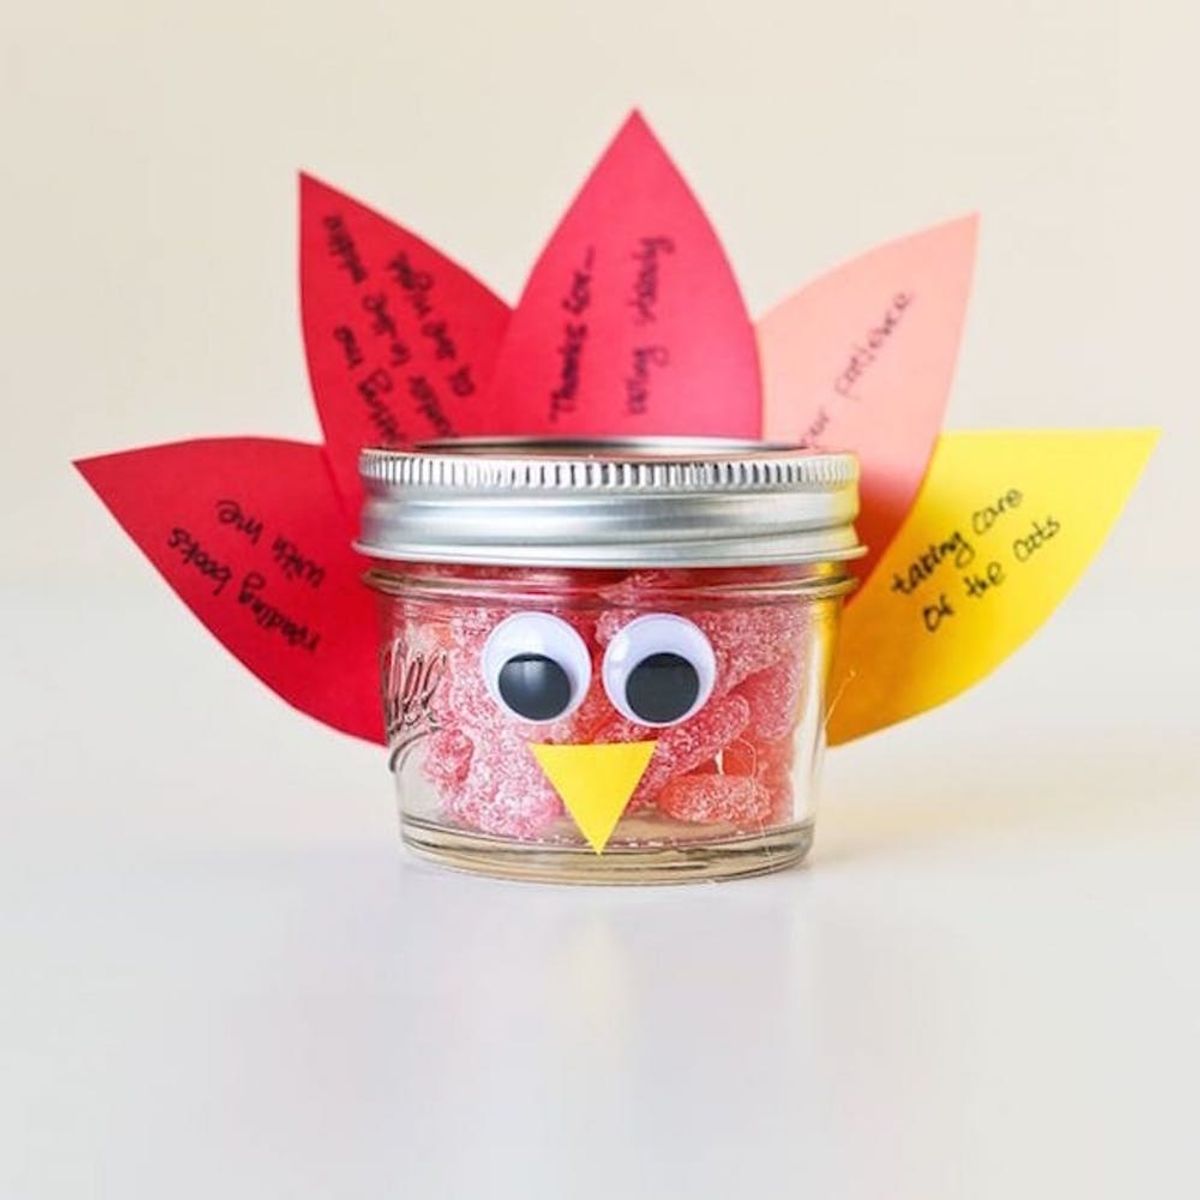 15 Fun + Festive Thanksgiving Crafts for Kids